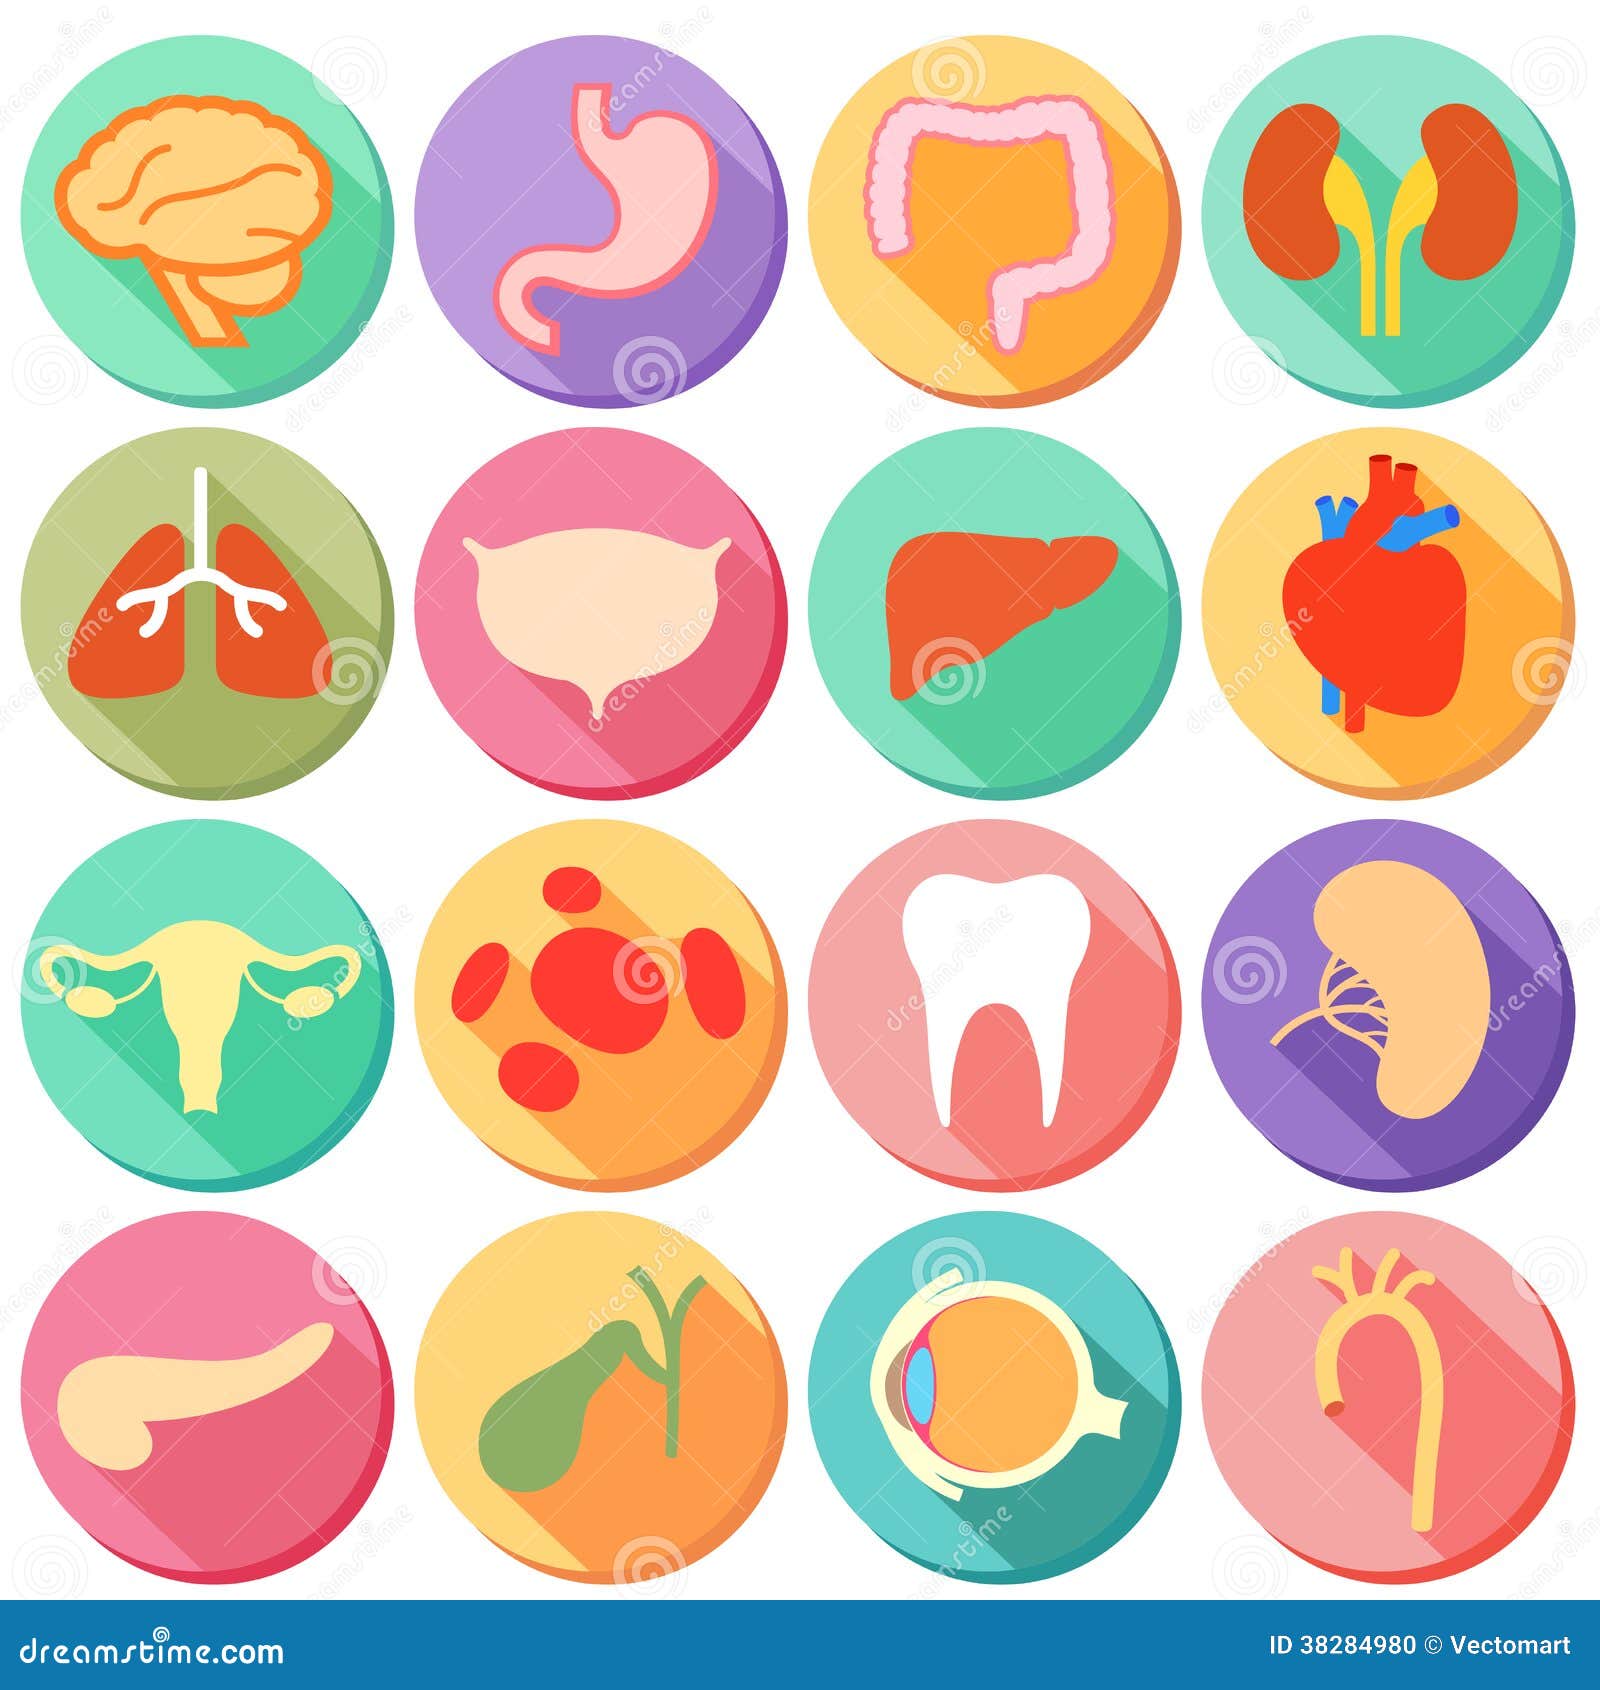 free clipart human body systems - photo #40